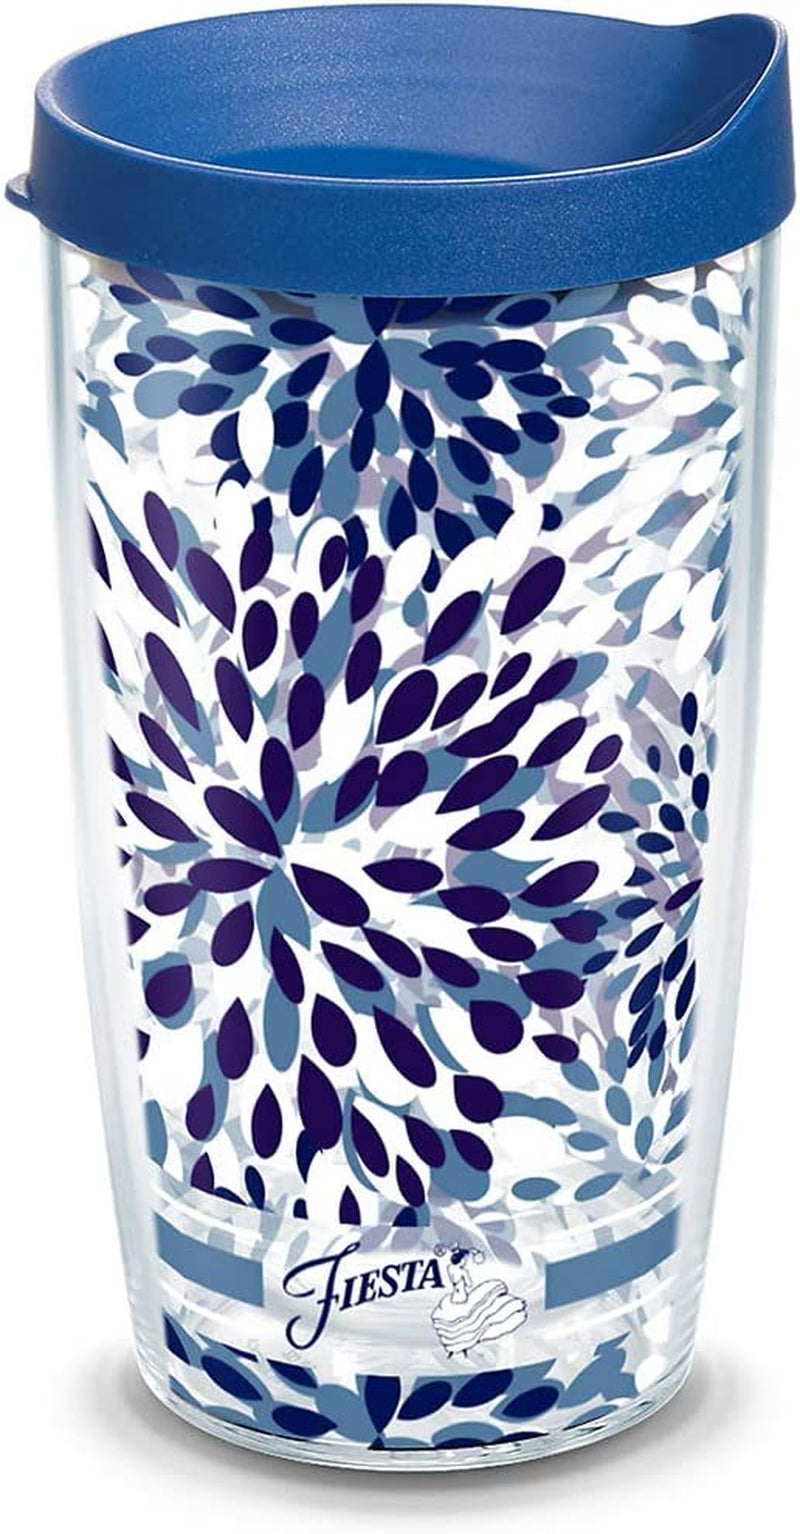 Tervis Made in USA Double Walled Fiesta Insulated Tumbler Cup Keeps Drinks Cold & Hot, 16Oz - 2Pk, Lapis Calypso Home & Garden > Kitchen & Dining > Tableware > Drinkware Tervis Tumbler Company Lidded 16oz 